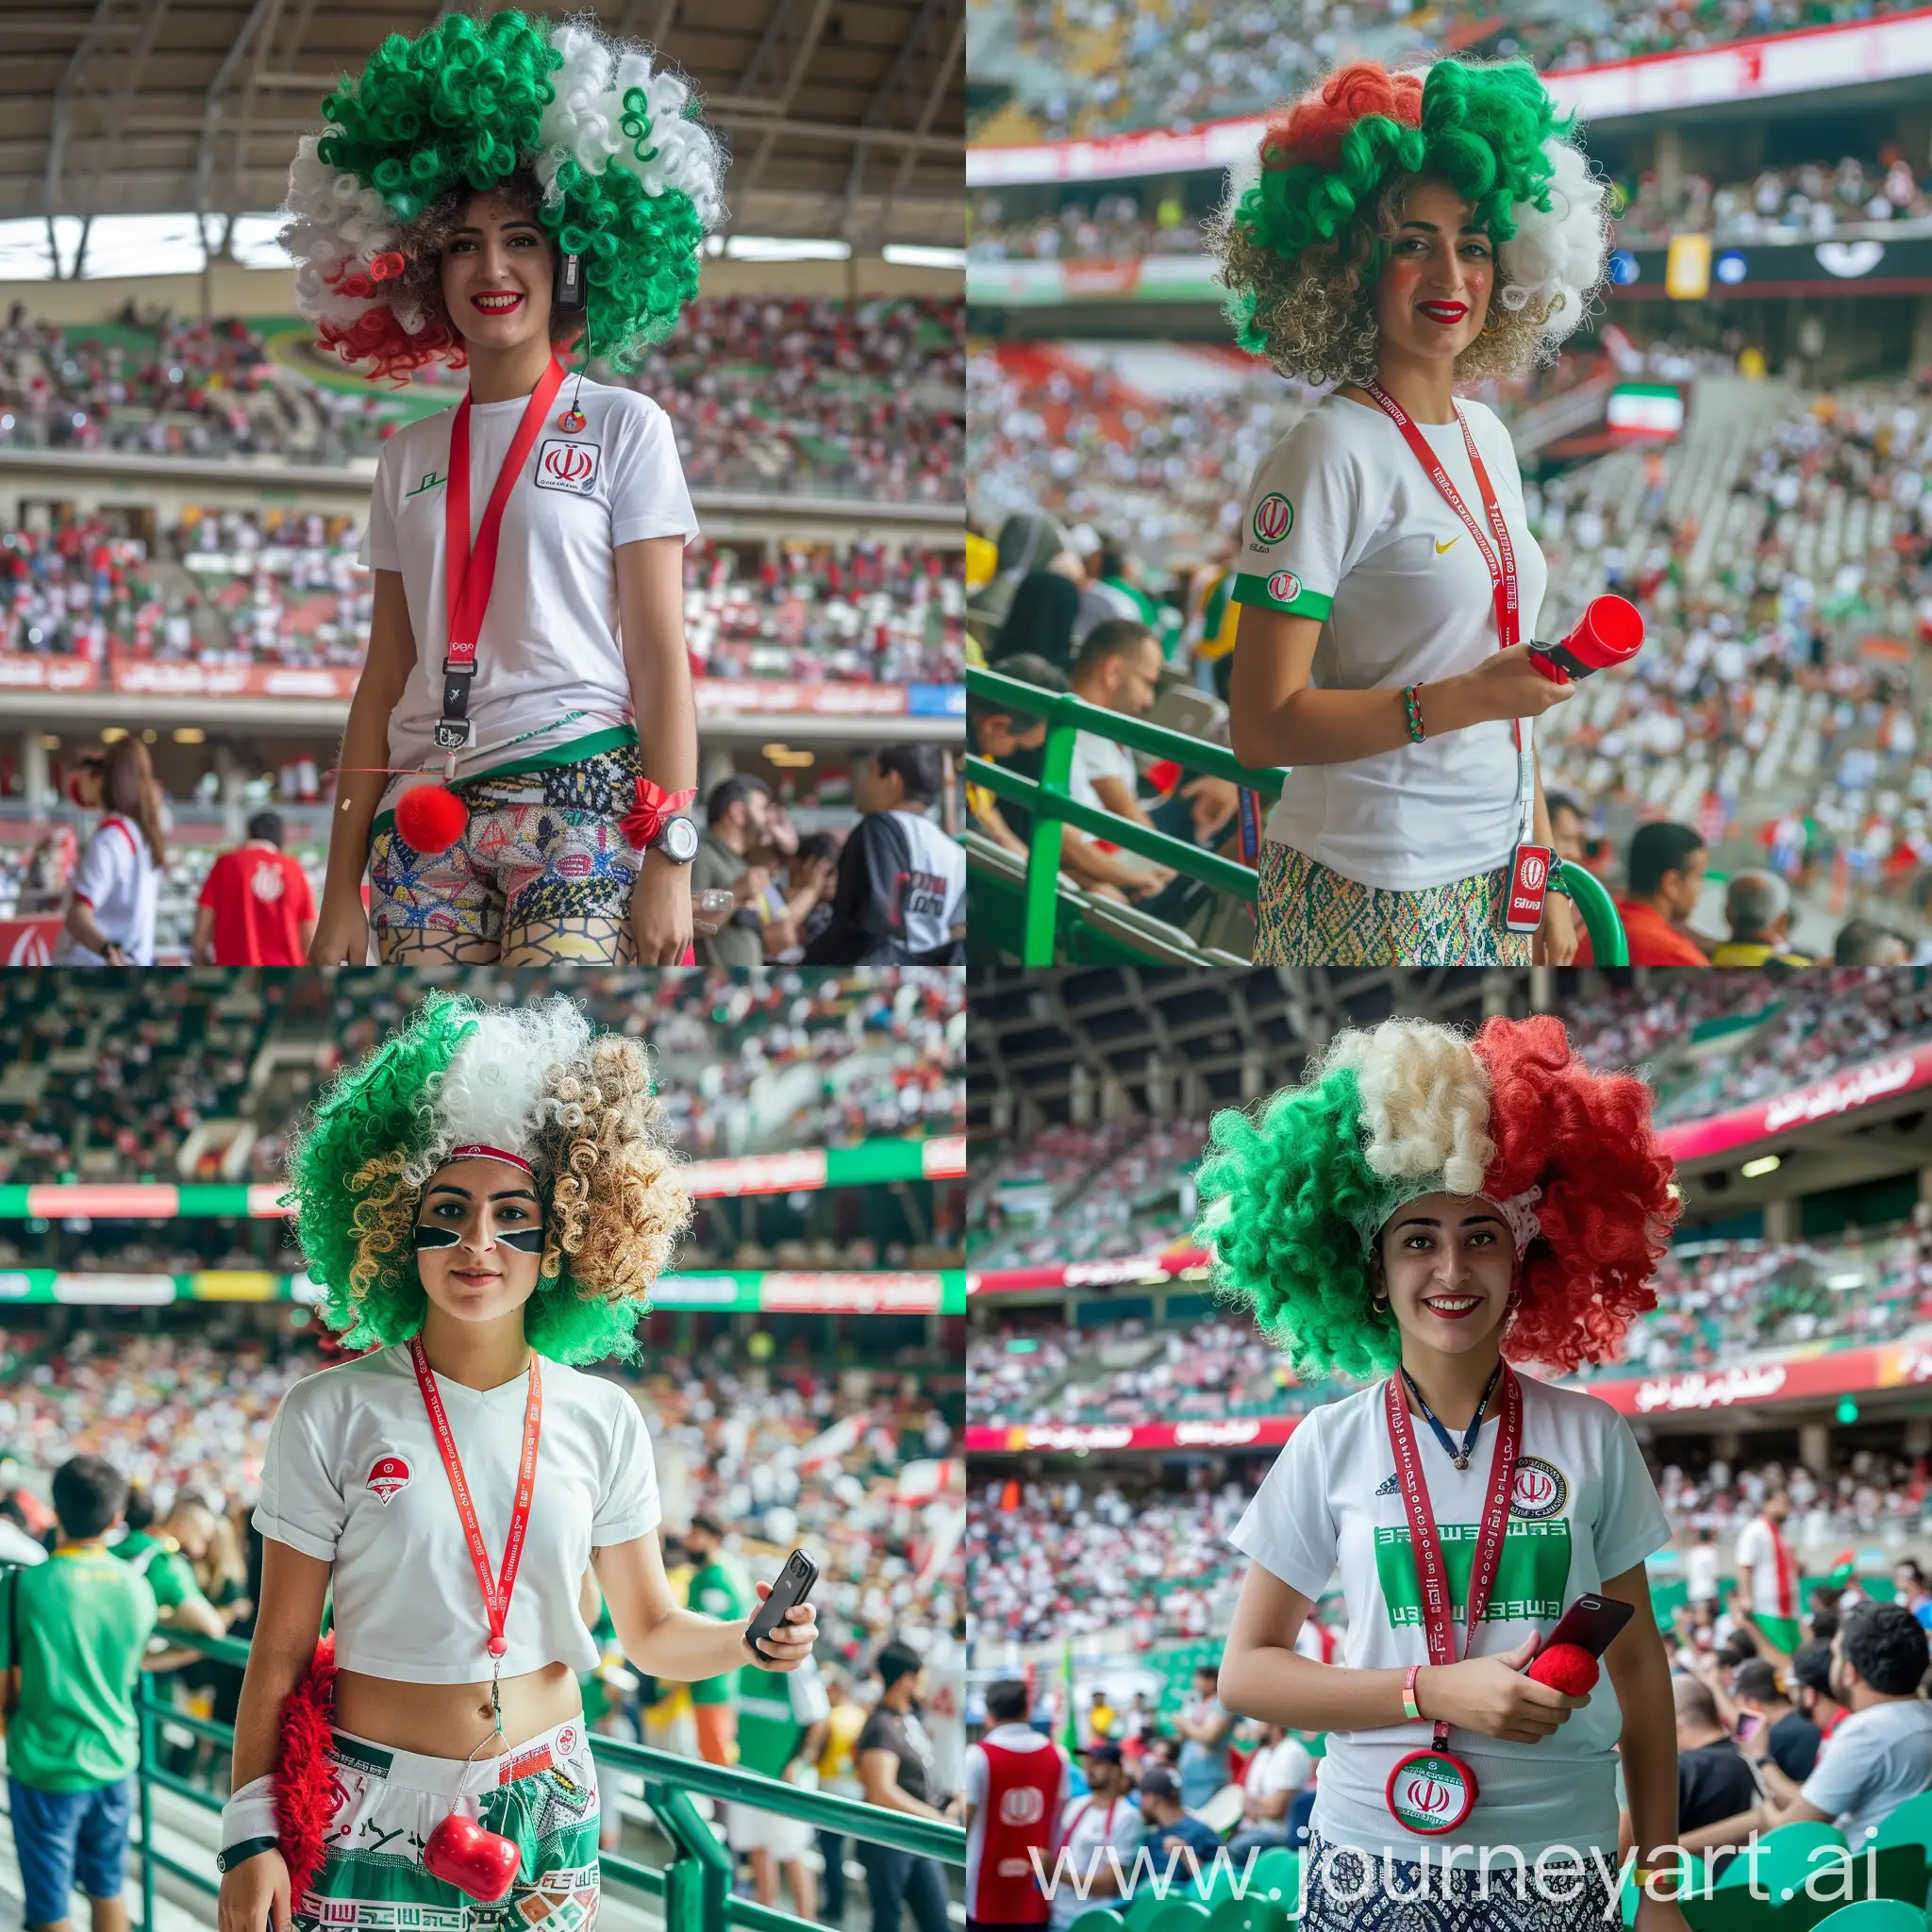 Colorful-Curly-Wig-Football-Fan-in-Exciting-Stadium-Scene